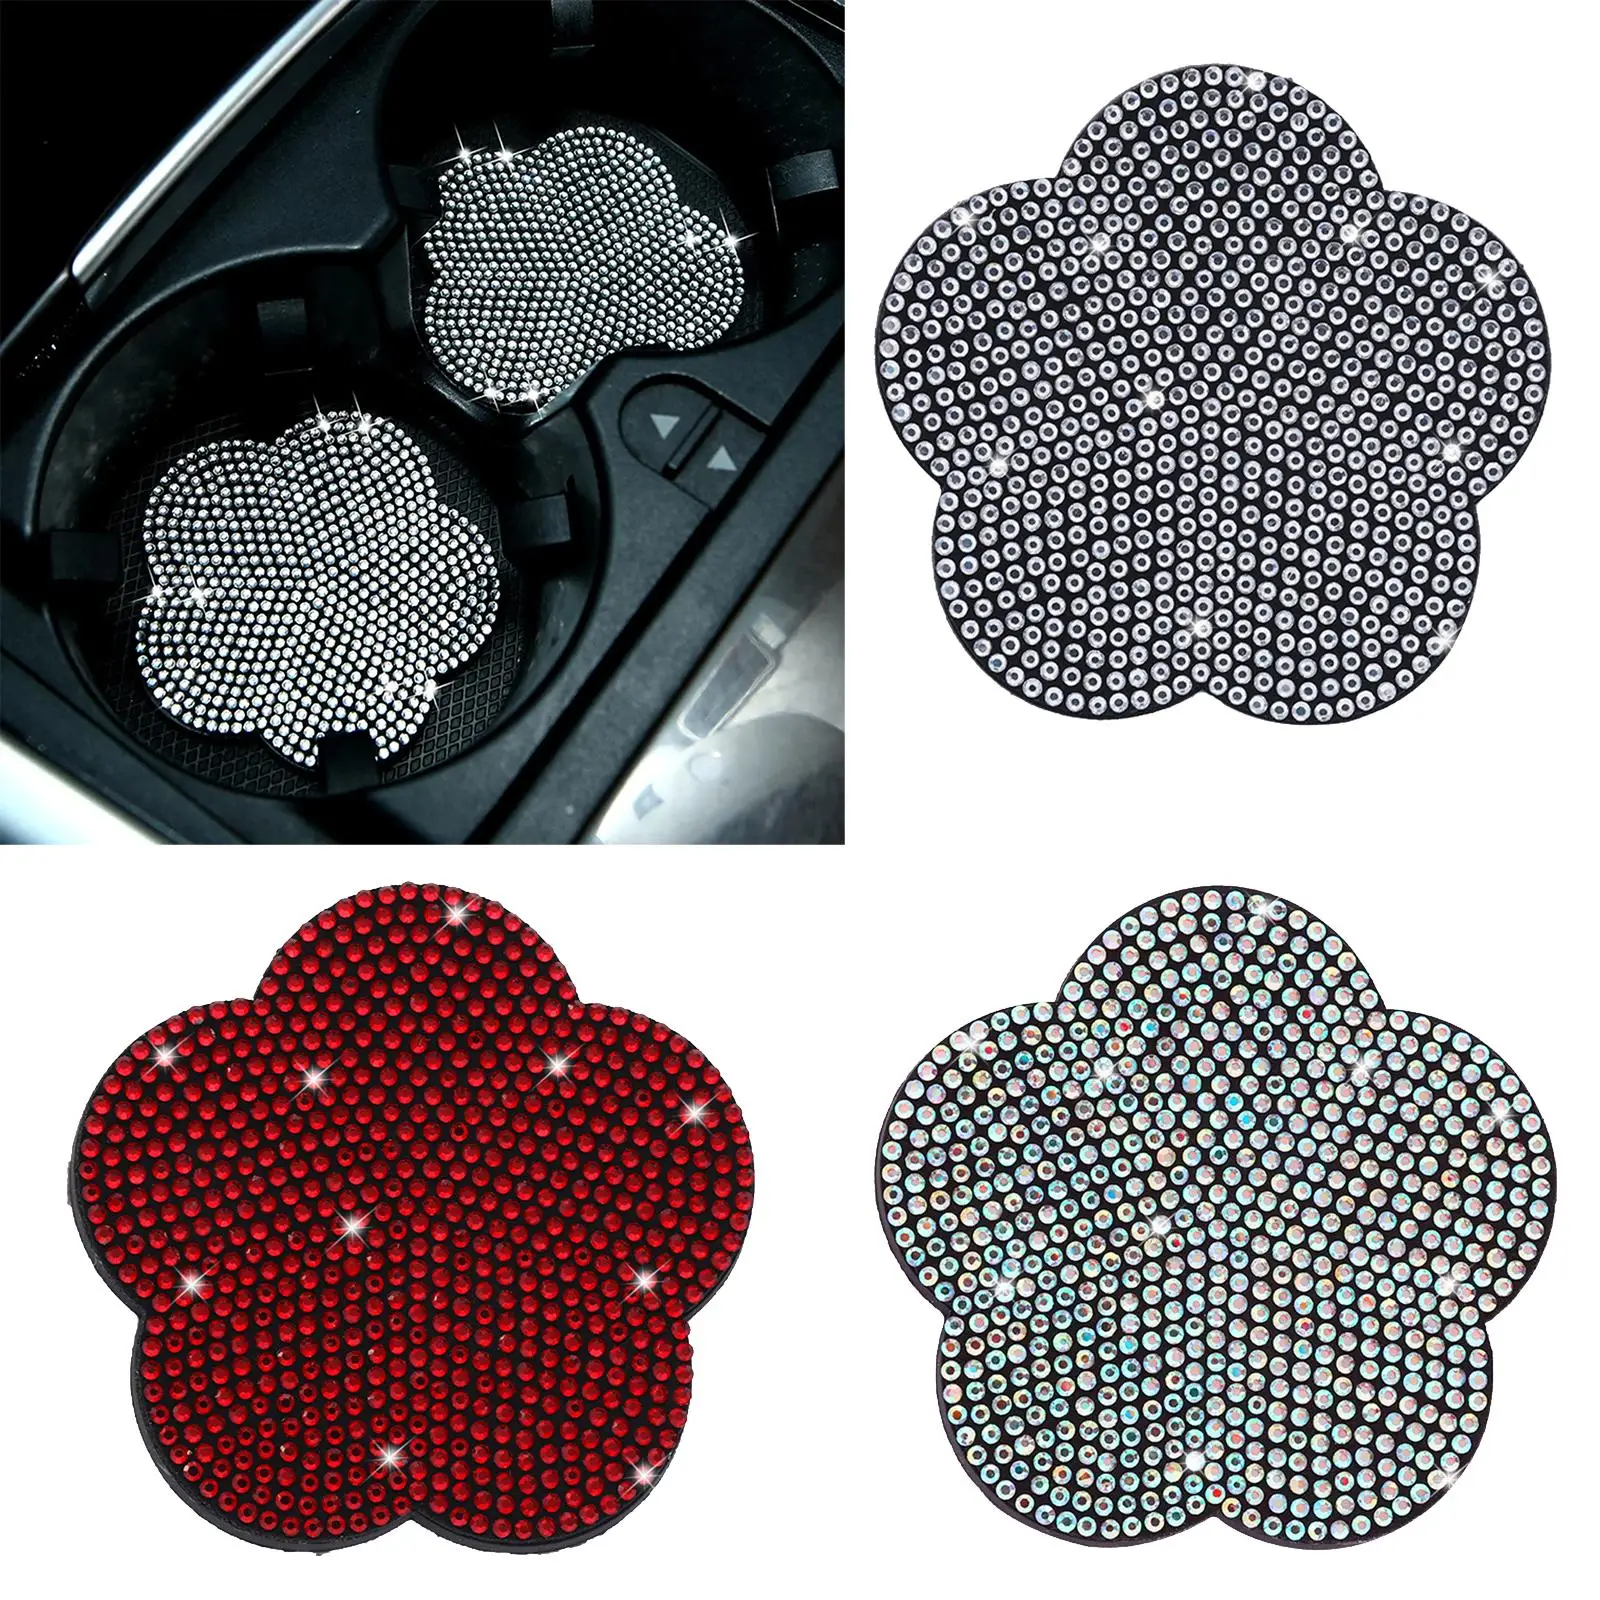 2 Pieces Car Coaster Water Cup Bottle Holder Pad Mat for Women Men